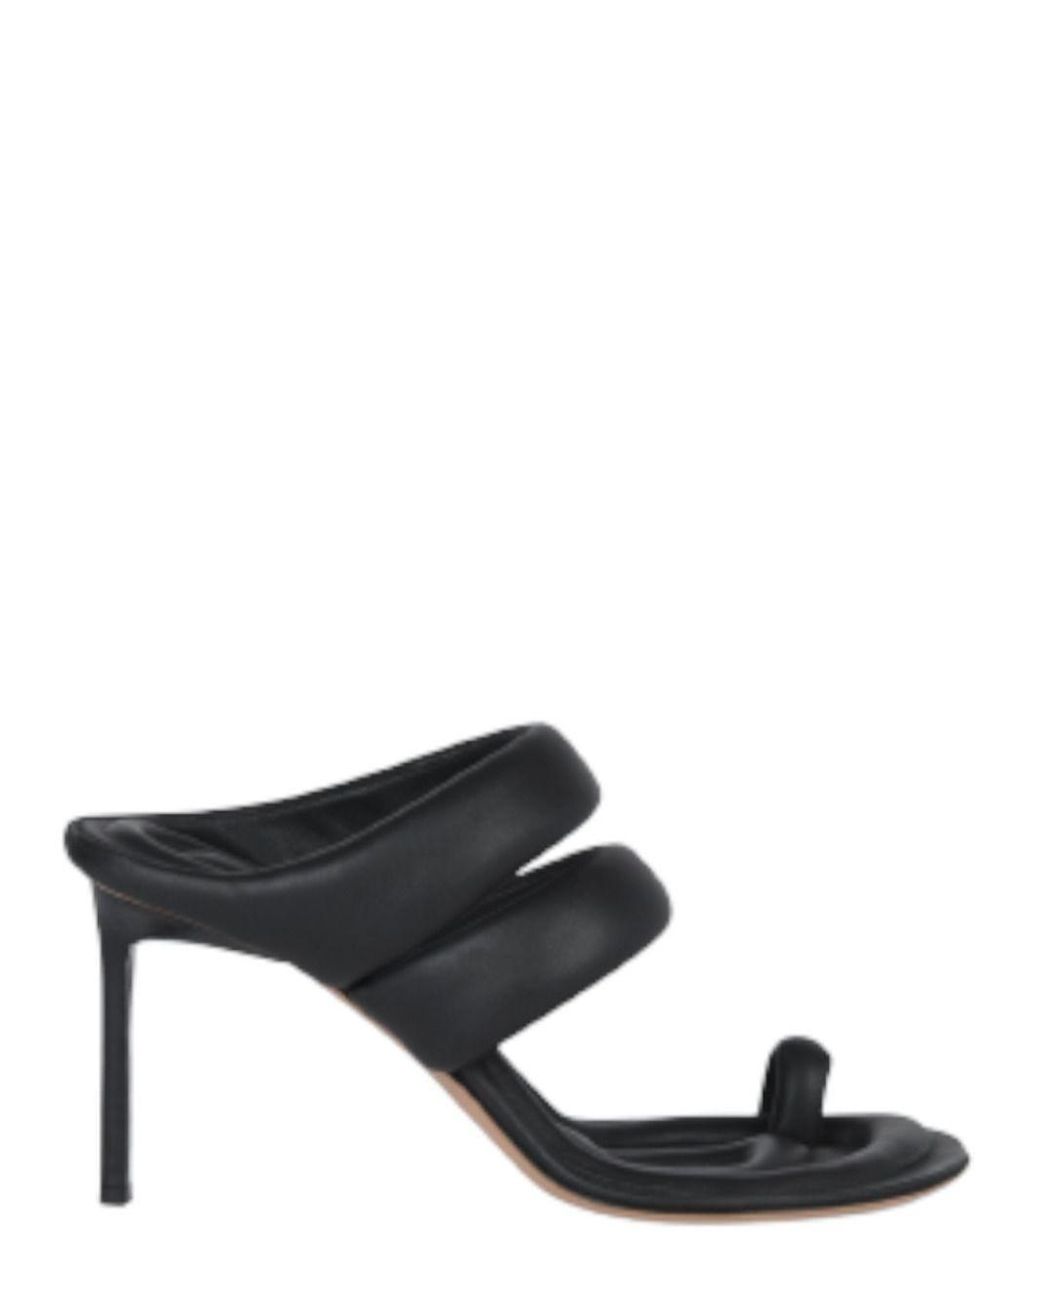 Jacquemus Black Cassis Sandals With Double Strap | Lyst